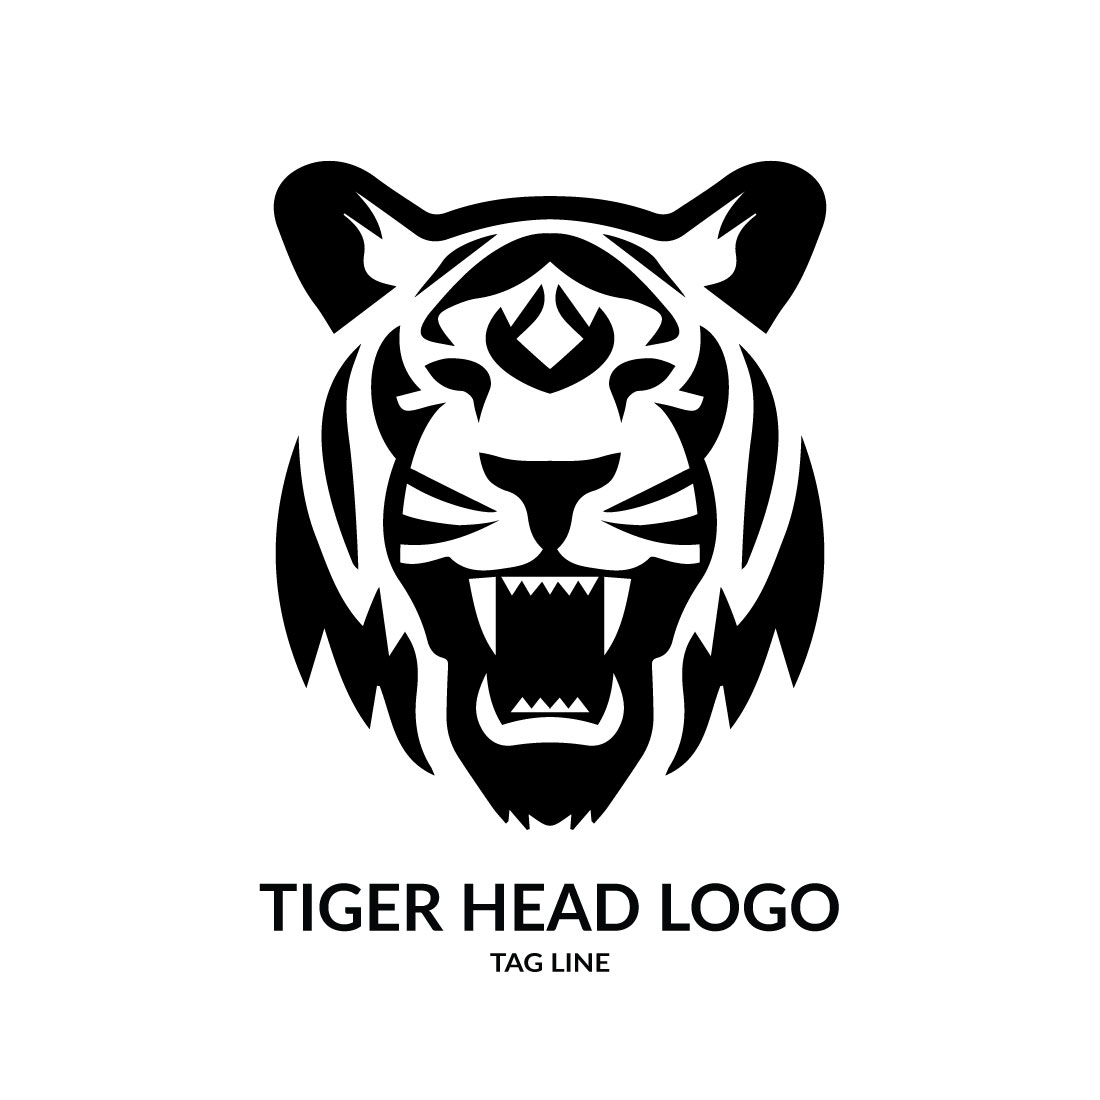 Tiger Head Logo Template cover image.